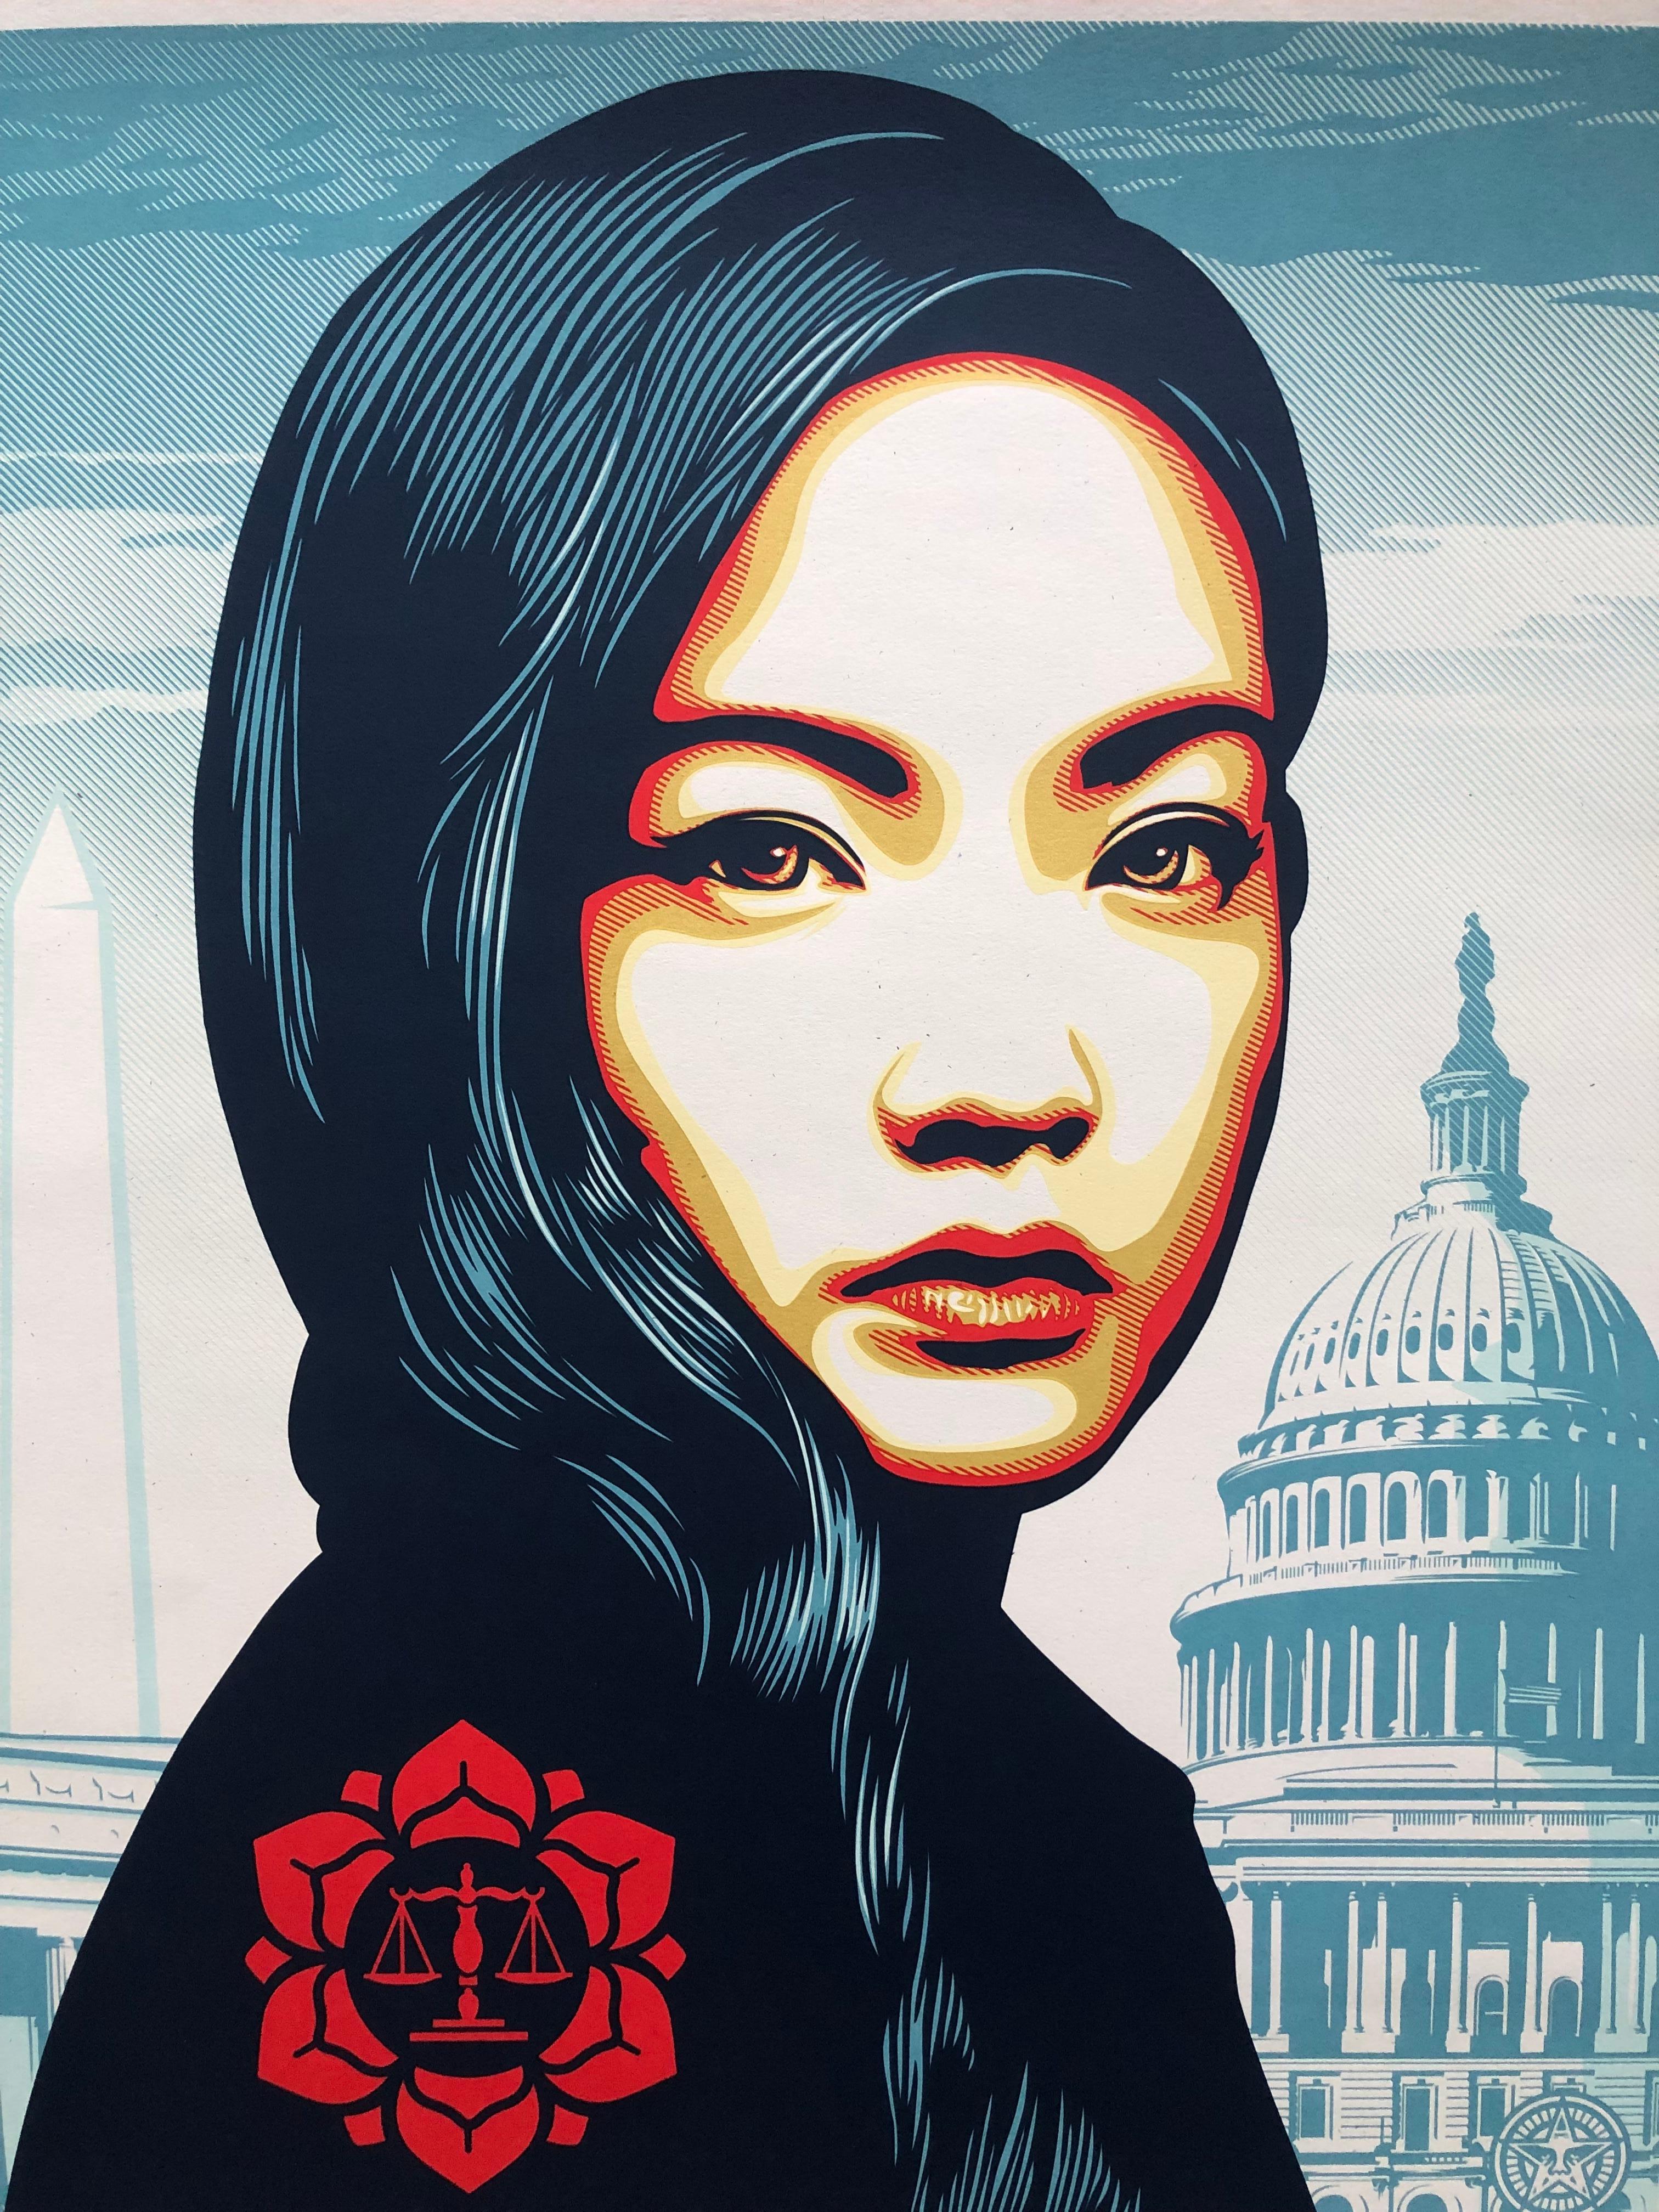 We The Future, Young Woman (Capitol) - Original Serigraph Handsigned Numbered - Print by Shepard Fairey